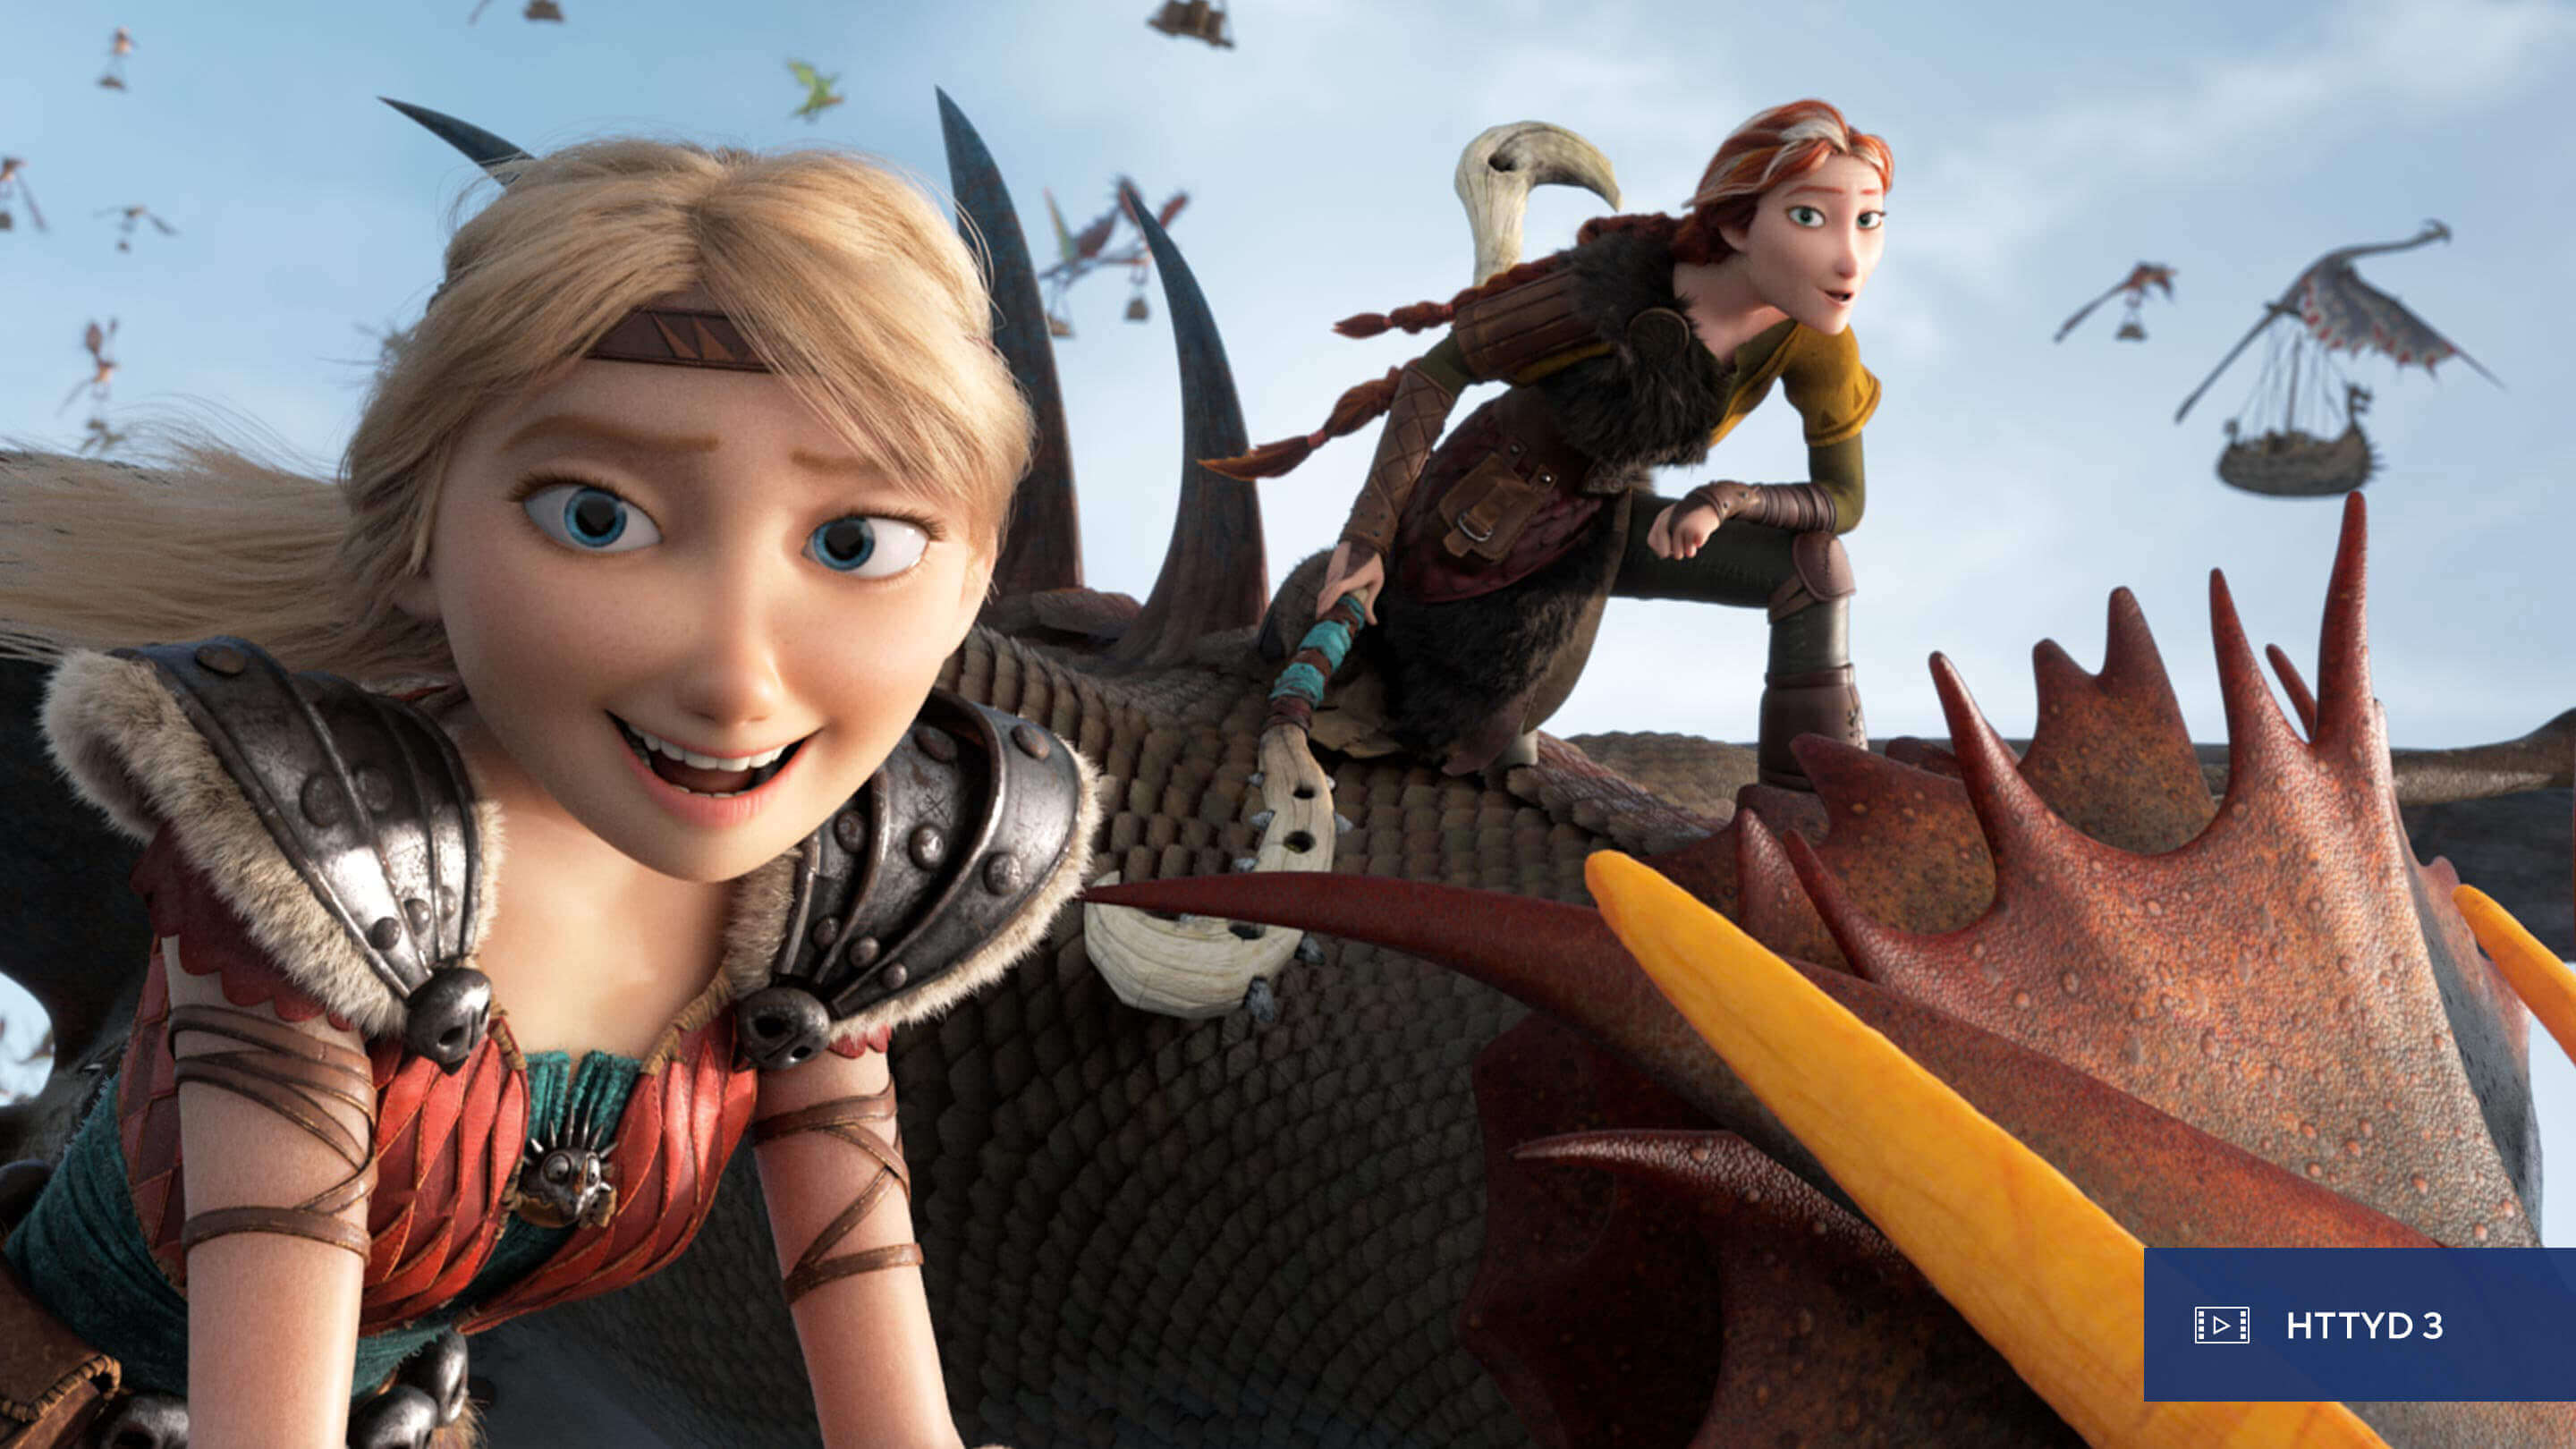 How to Train Your Dragon | Official Site | DreamWorks